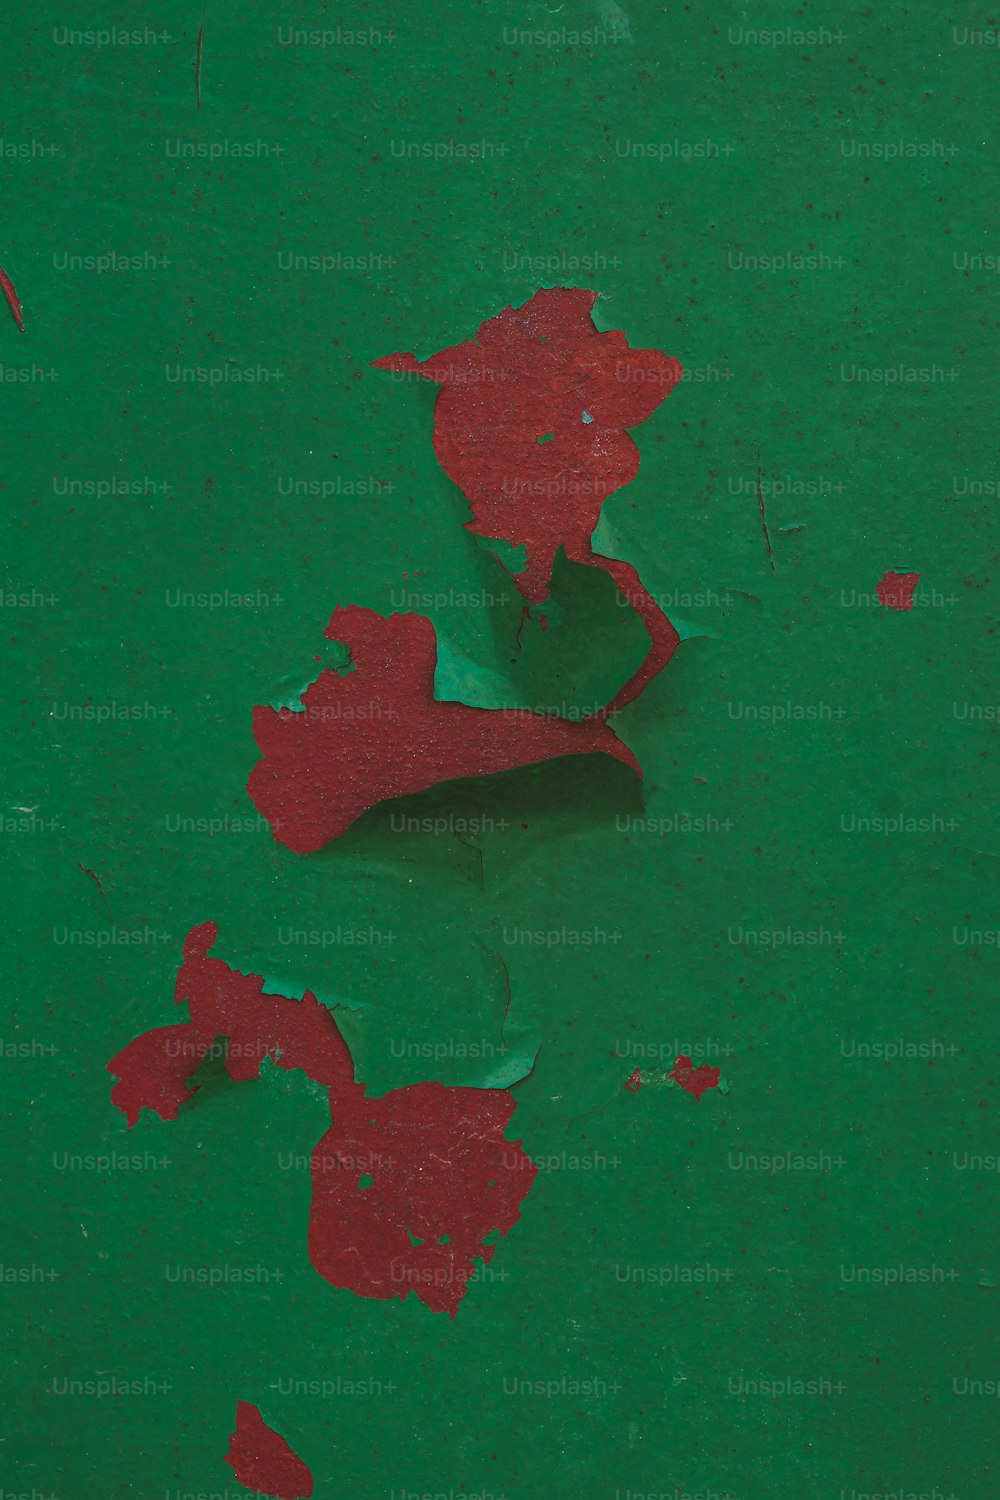 a red piece of paper on a green surface